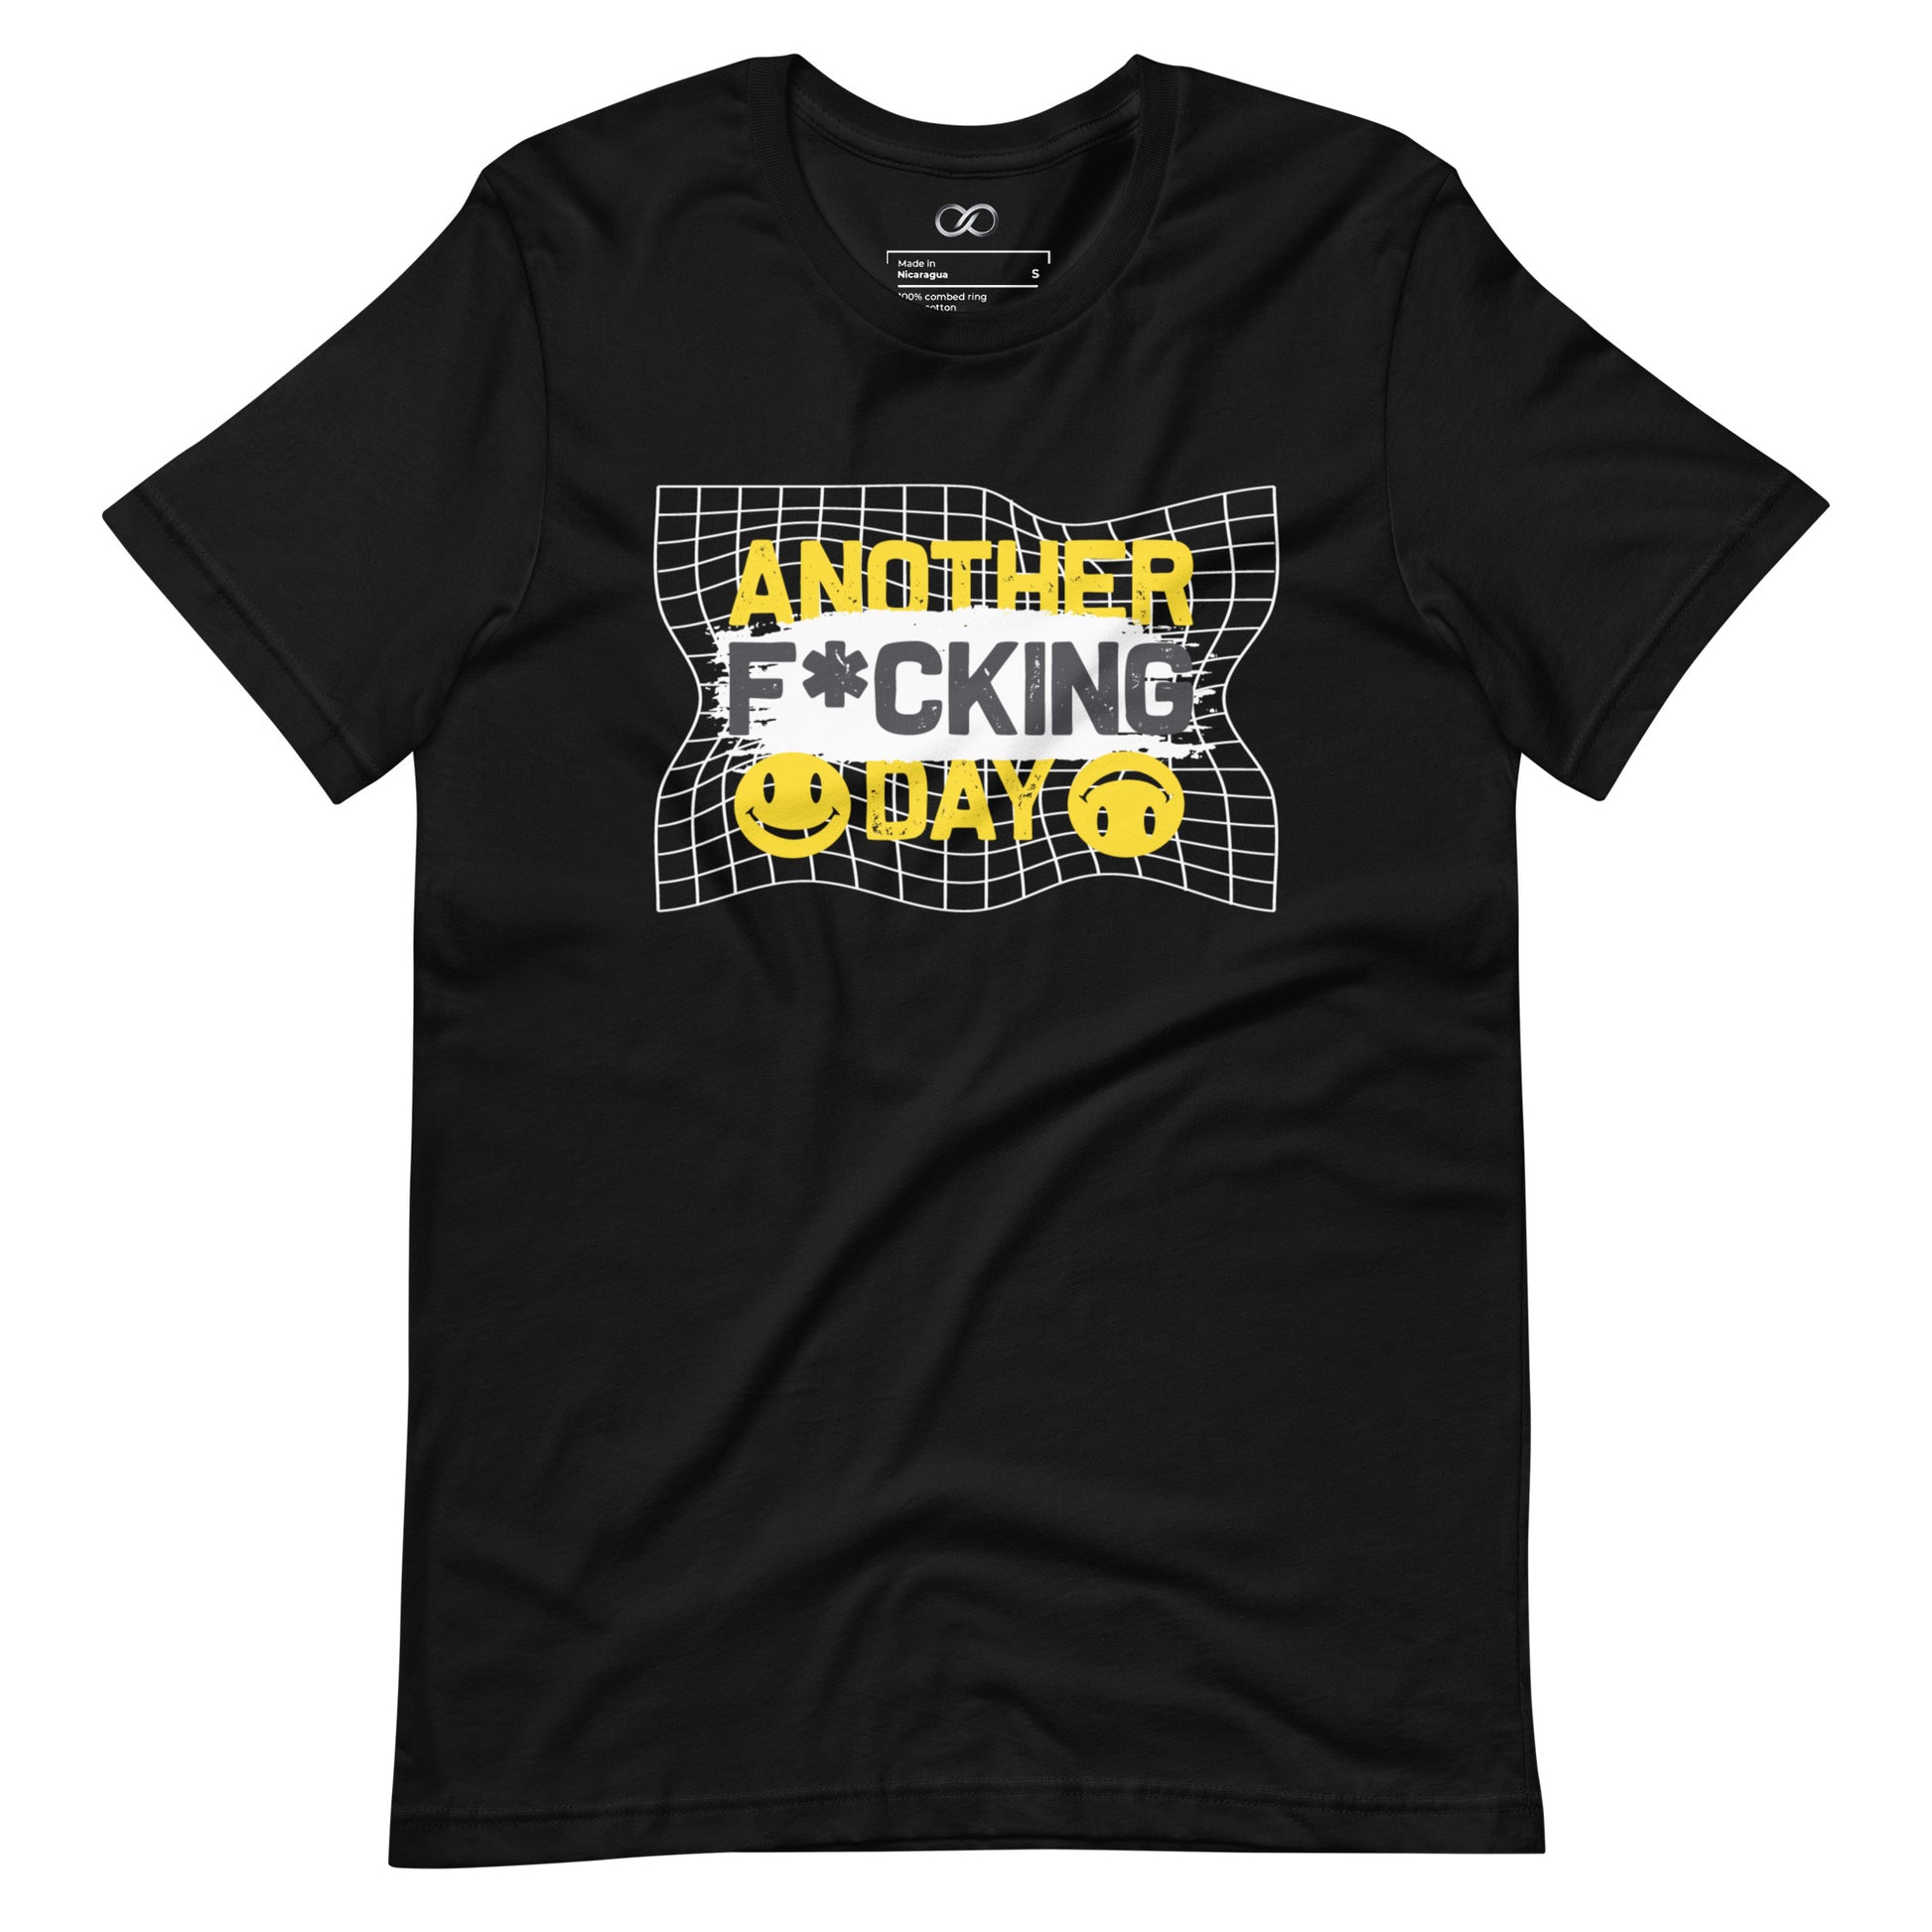 A black unisex t-shirt with a bold graphic print that reads 'ANOTHER F*CKING DAY' in yellow block letters, underscored by a grid pattern and accompanied by two smiling face emojis with the same bright yellow color, adding a sarcastic tone to the statement.